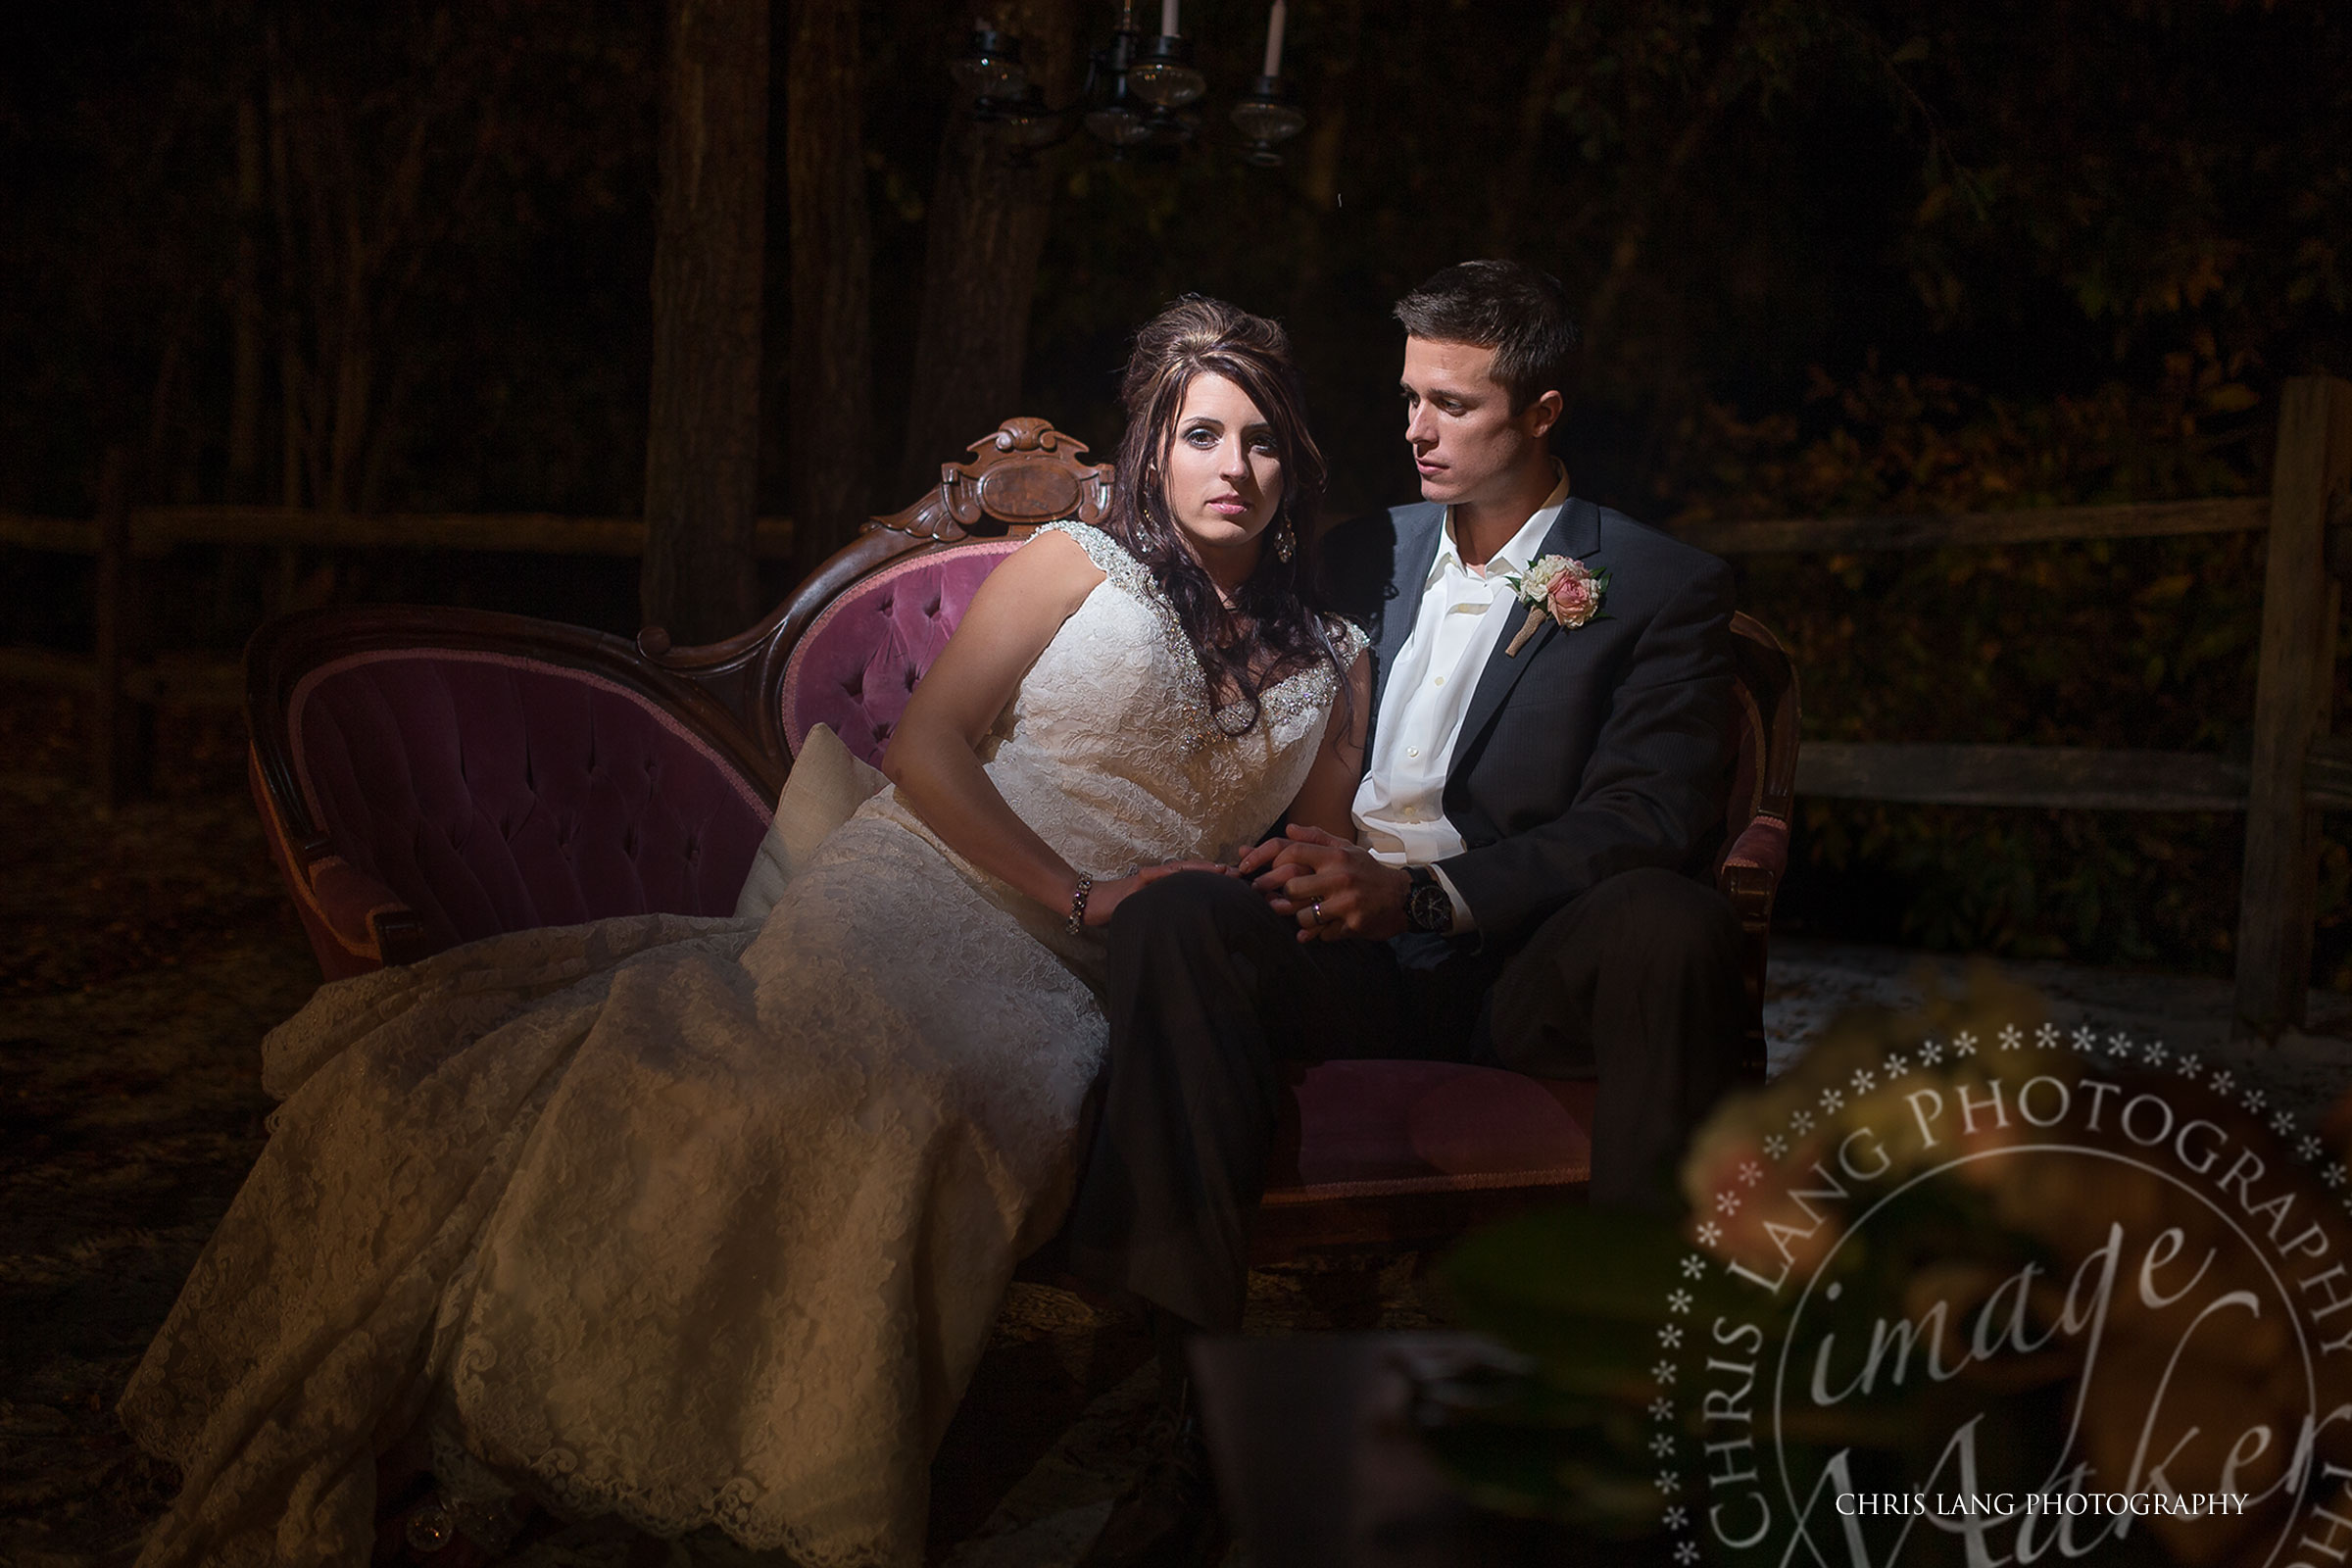 Romantic-Nighttime-Wedding-Picture-of-Bride-Groom-Sitting-on-a-Couch-at-River-Landing-River-Lodge-Wedding Picture Ideas